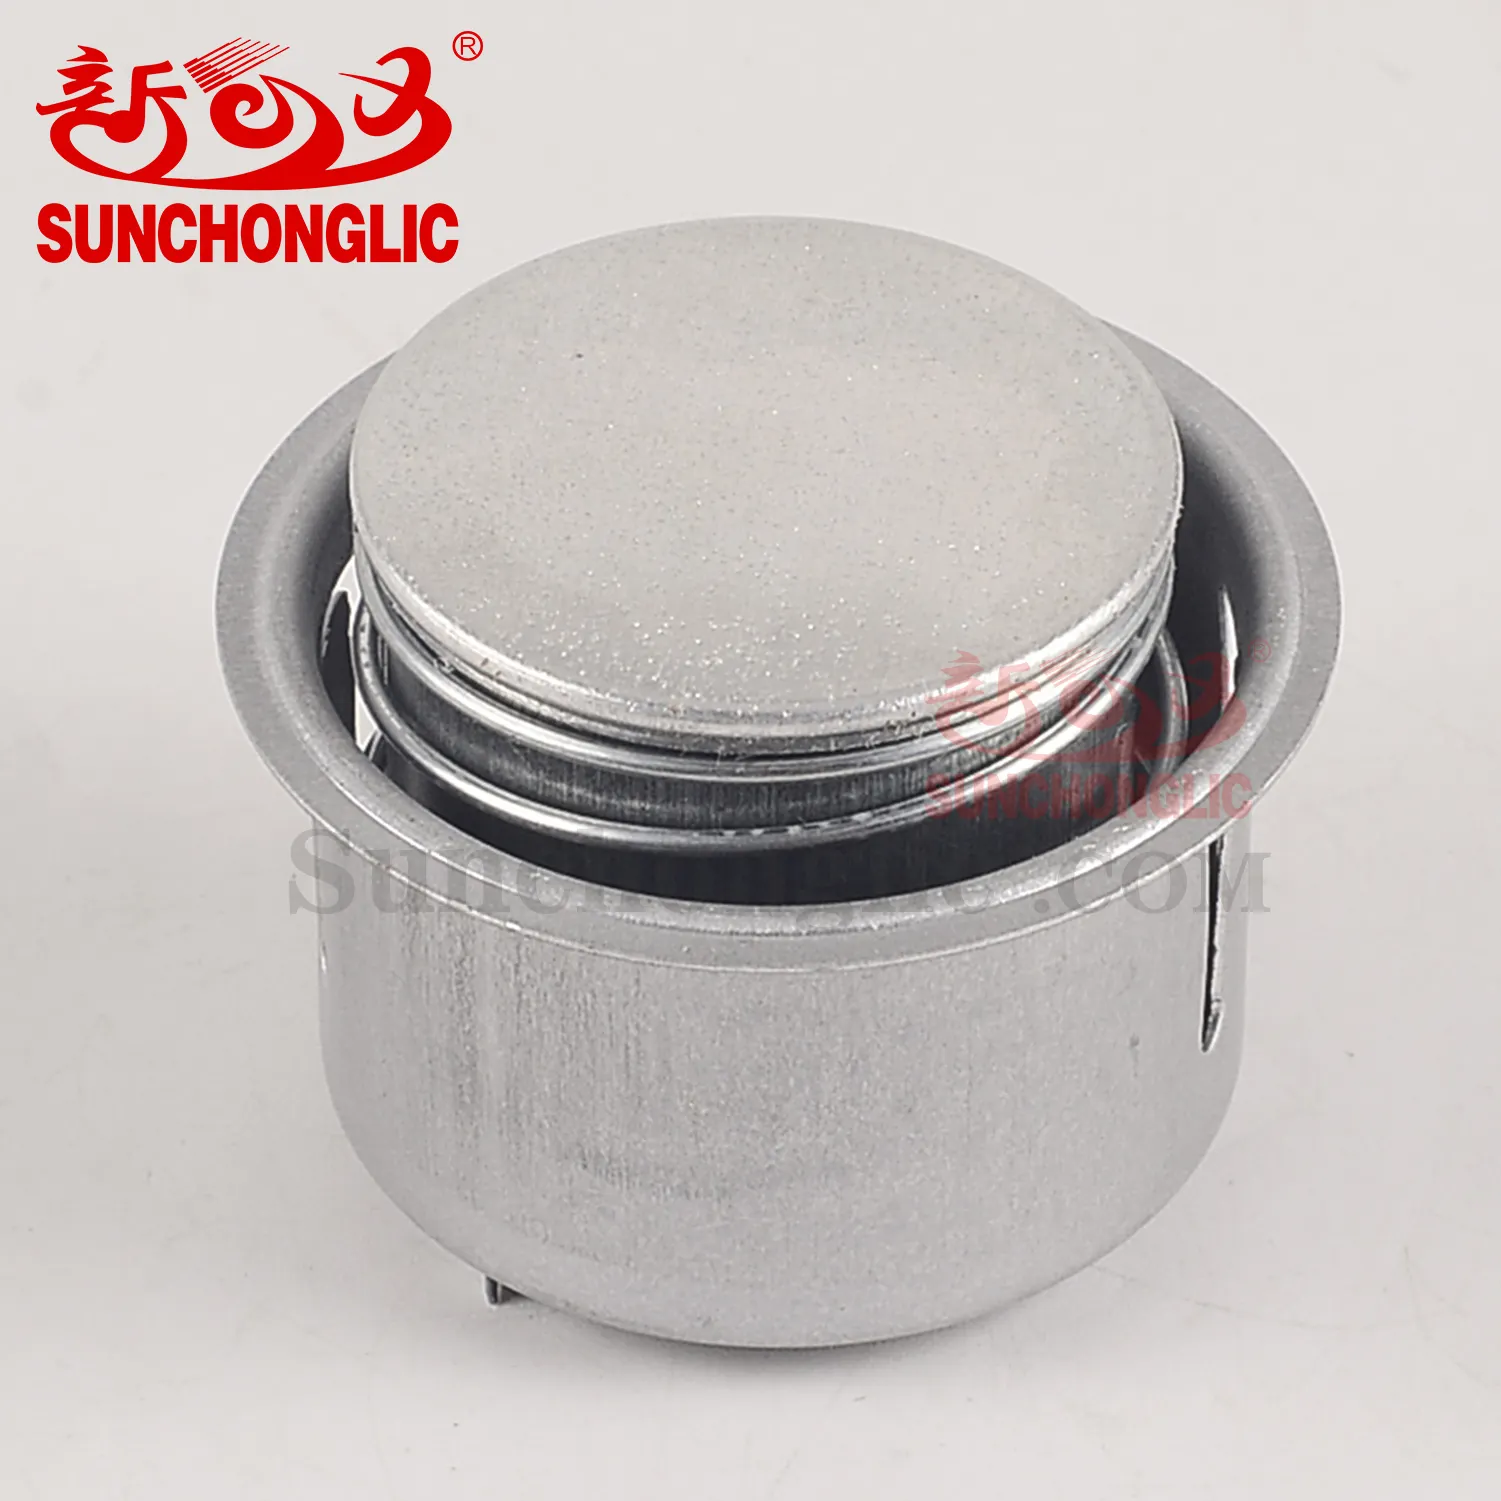 Sunchonglic rice cooker parts electric rice cooker magnet temperature limiter of magnetic rice cooker